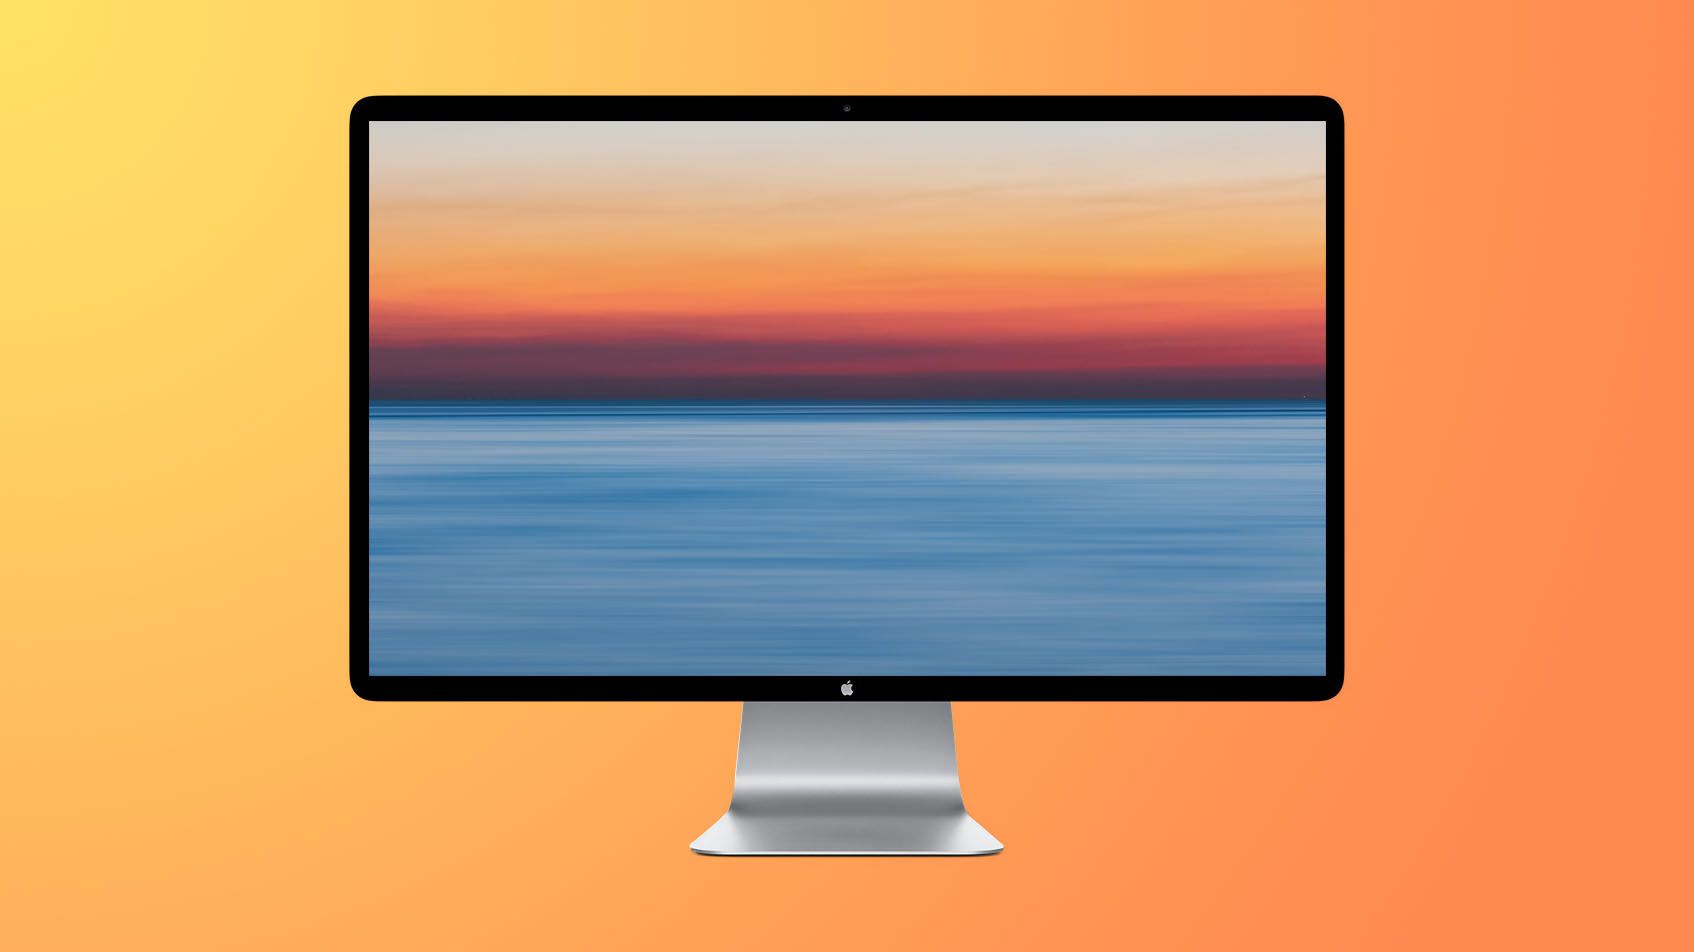 Apple said it was working on a low-cost external monitor to succeed with the Thunderbolt Display